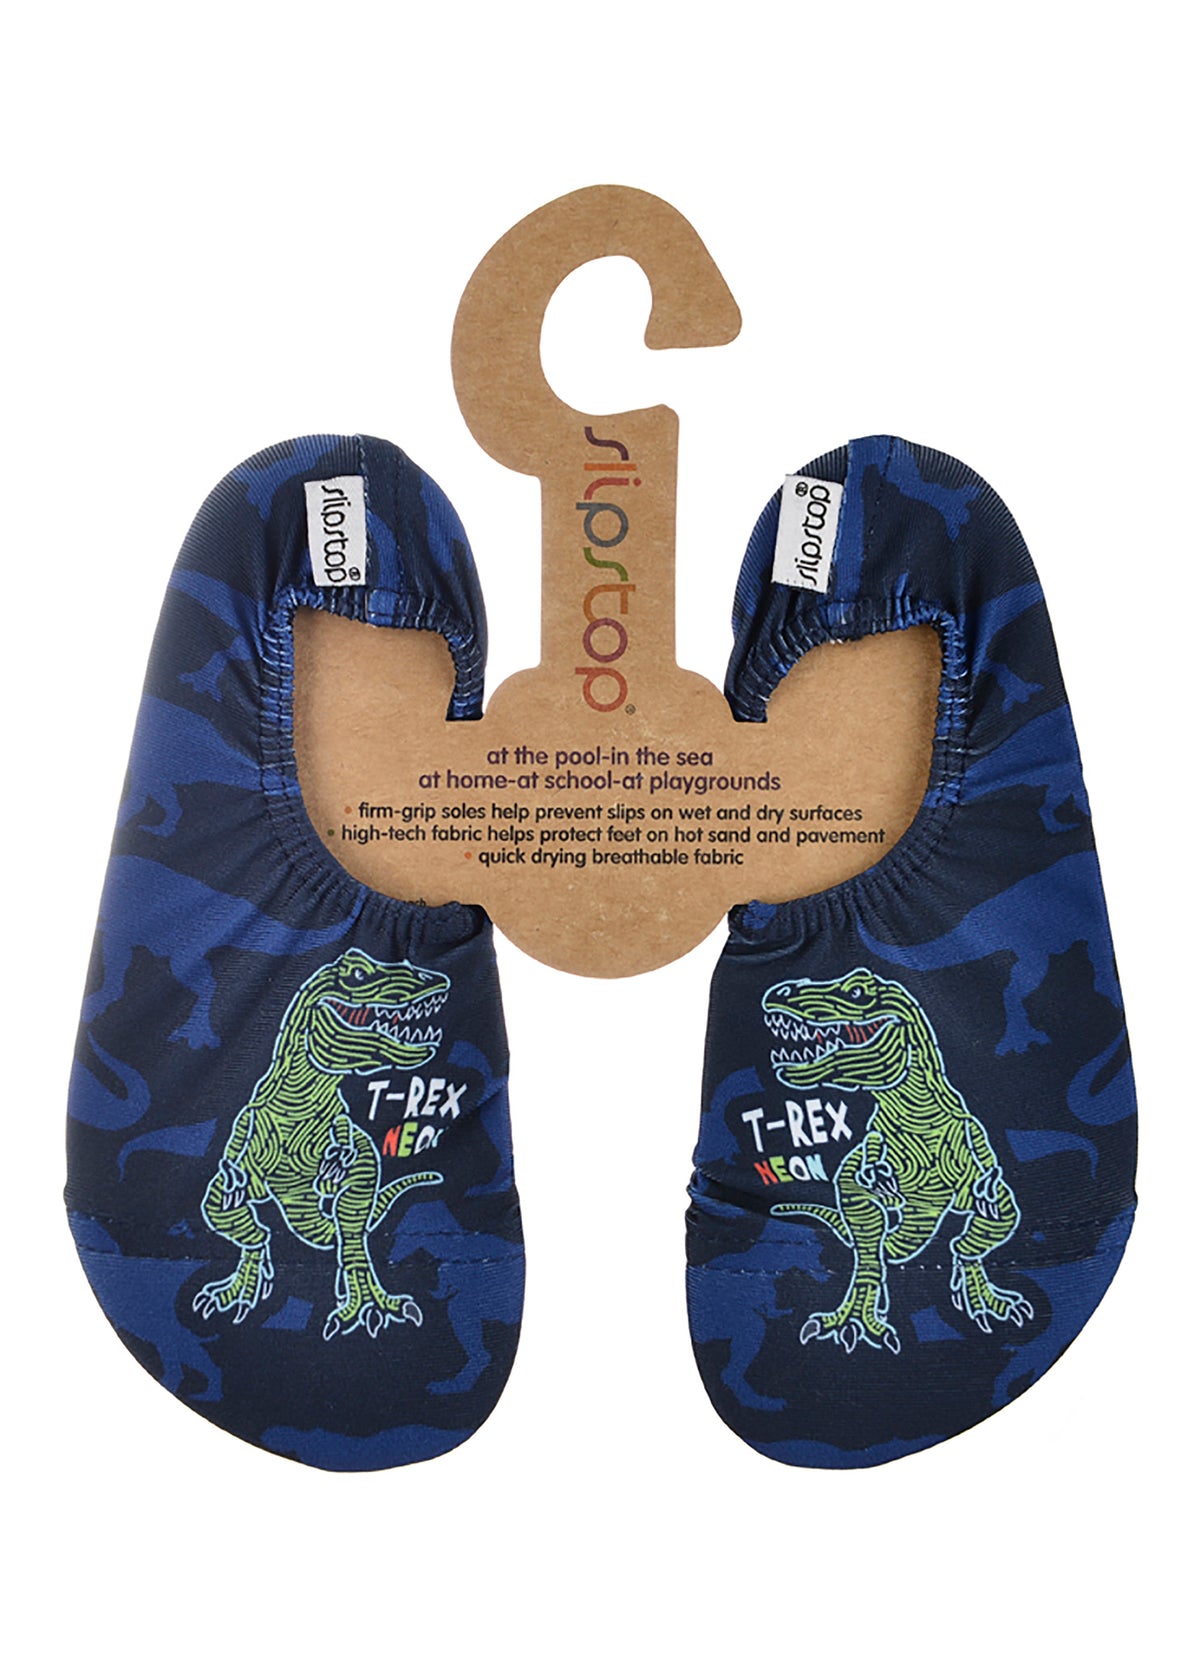 Children's slippers - Mighty, a dinosaur with a dark blue base